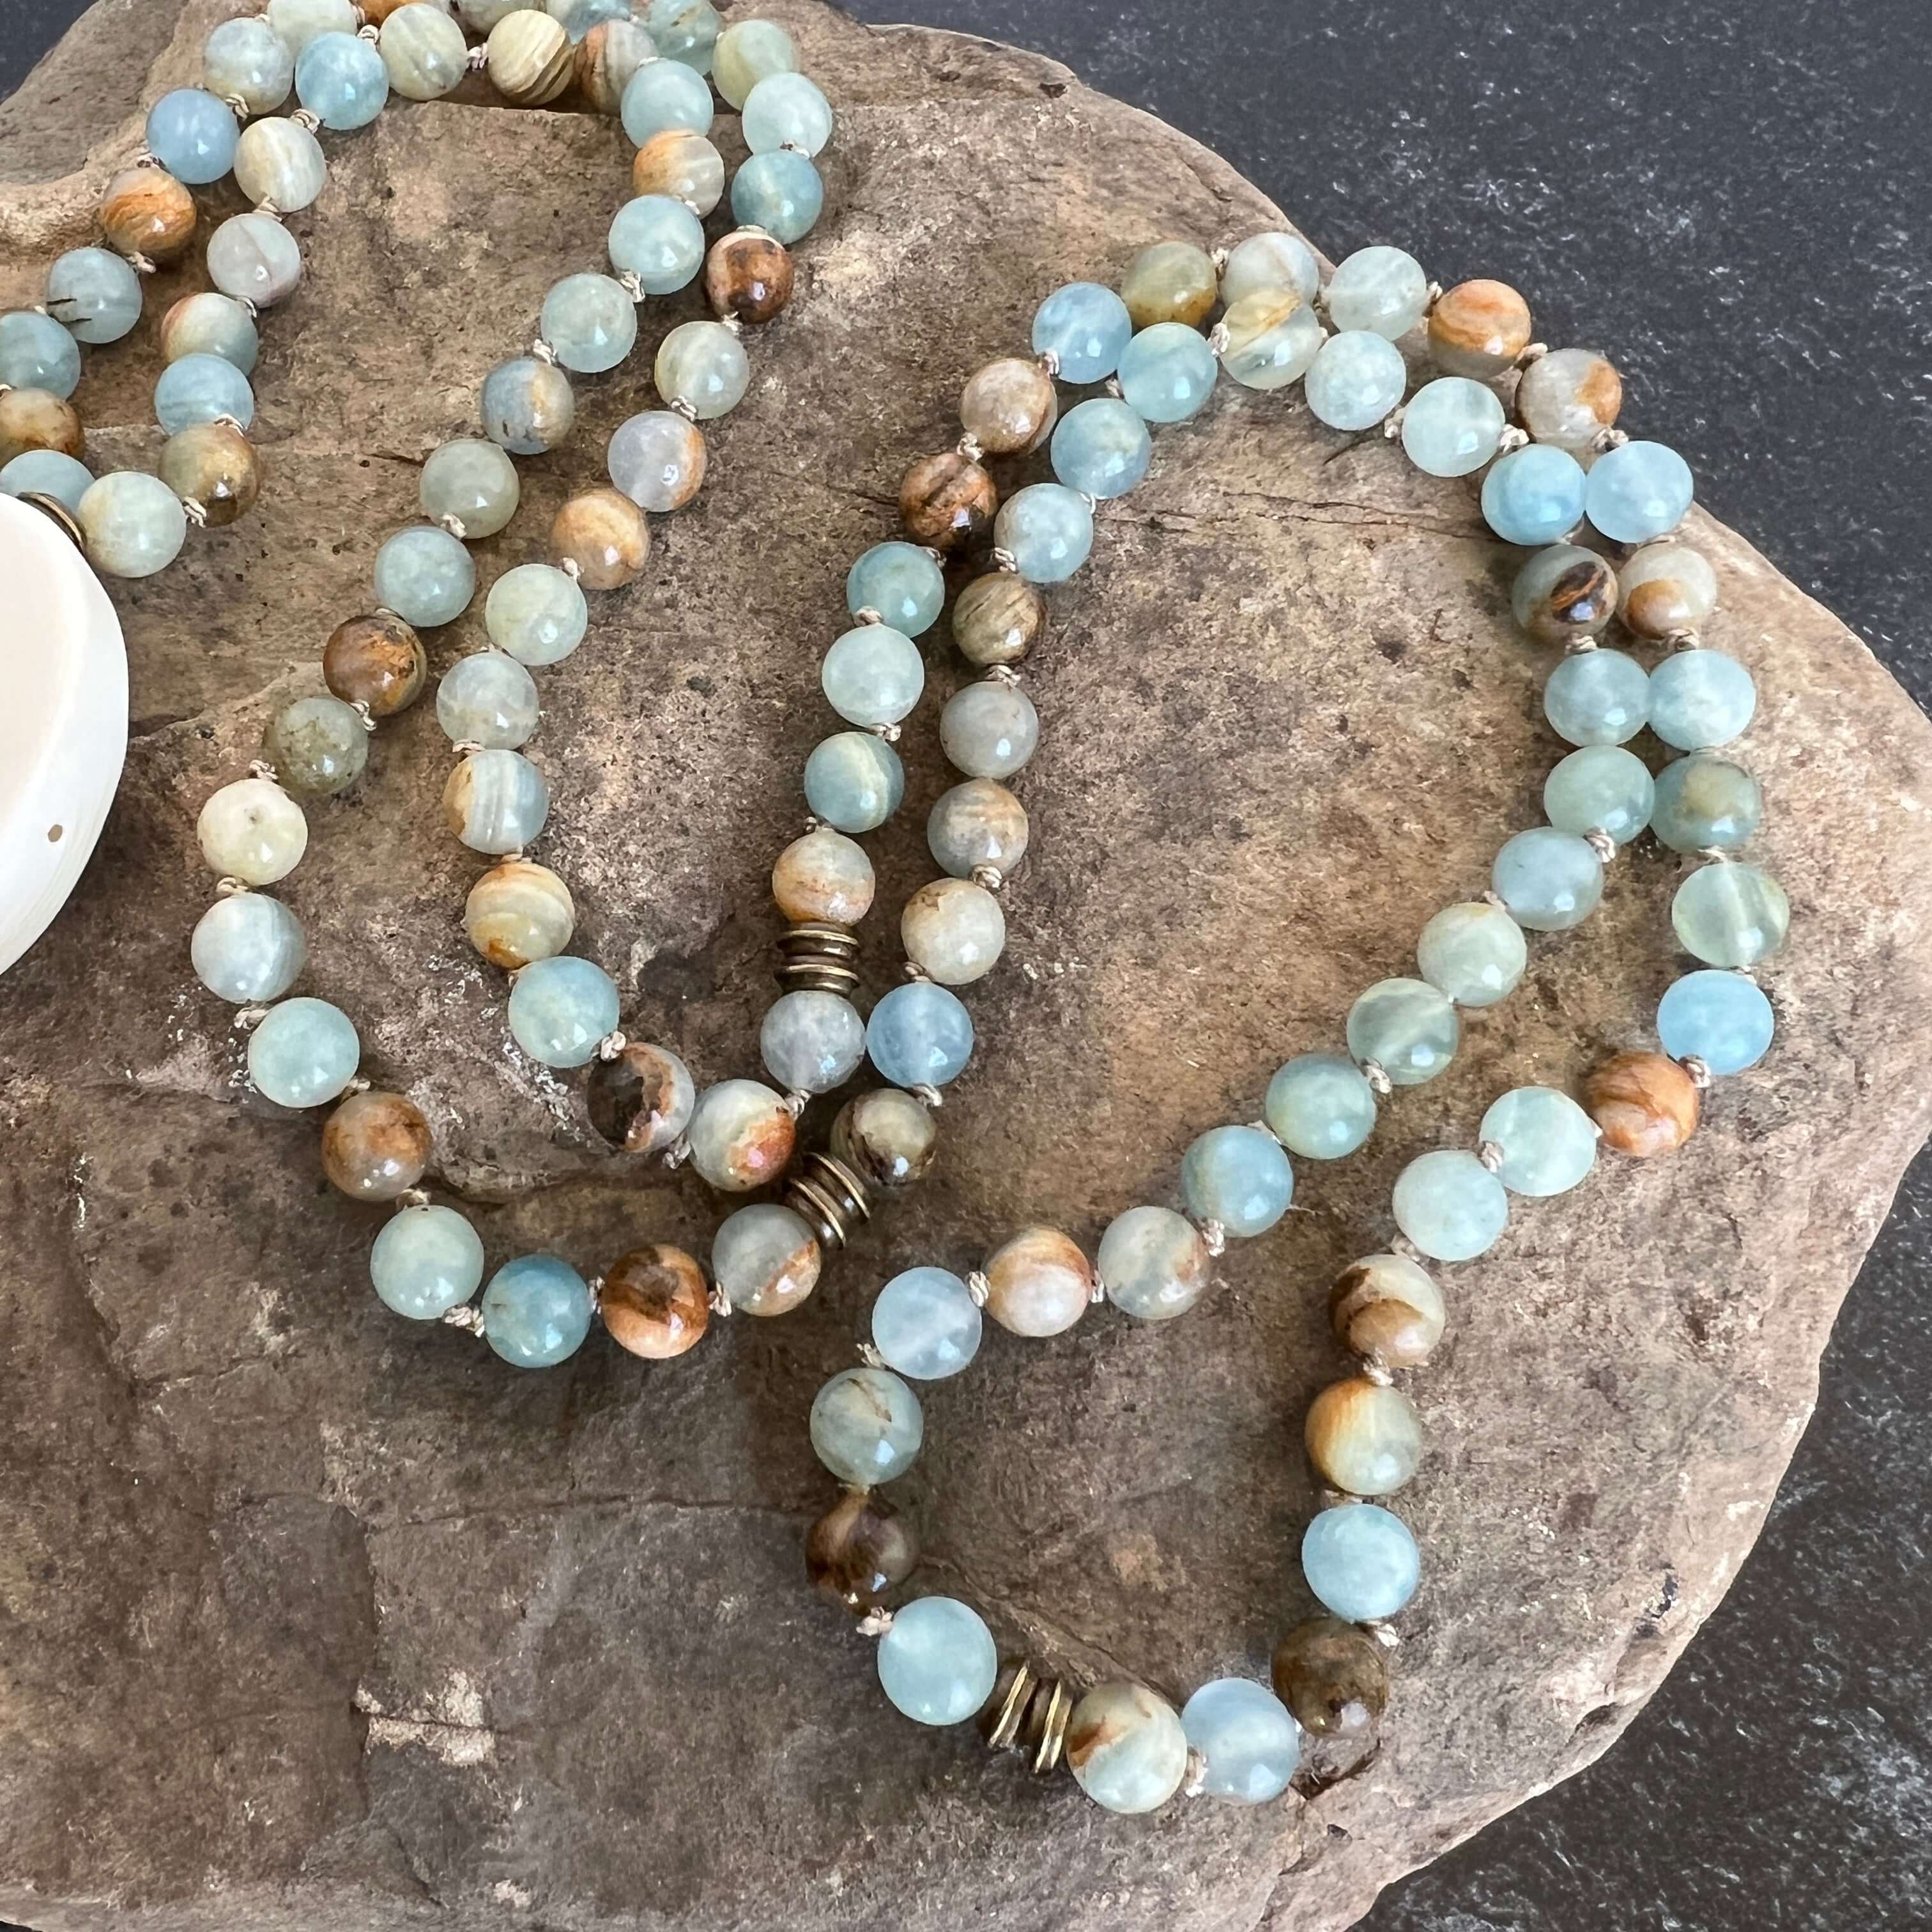 Lemurian Aquatine Calcite Mala The name of this particular calcite probably came about because of its distinct ocean blue and tan bands, denoting a strong land/water connection. Also known as Blue Argentinian Calcite, Argentinian Blue Onyx and Argentinian